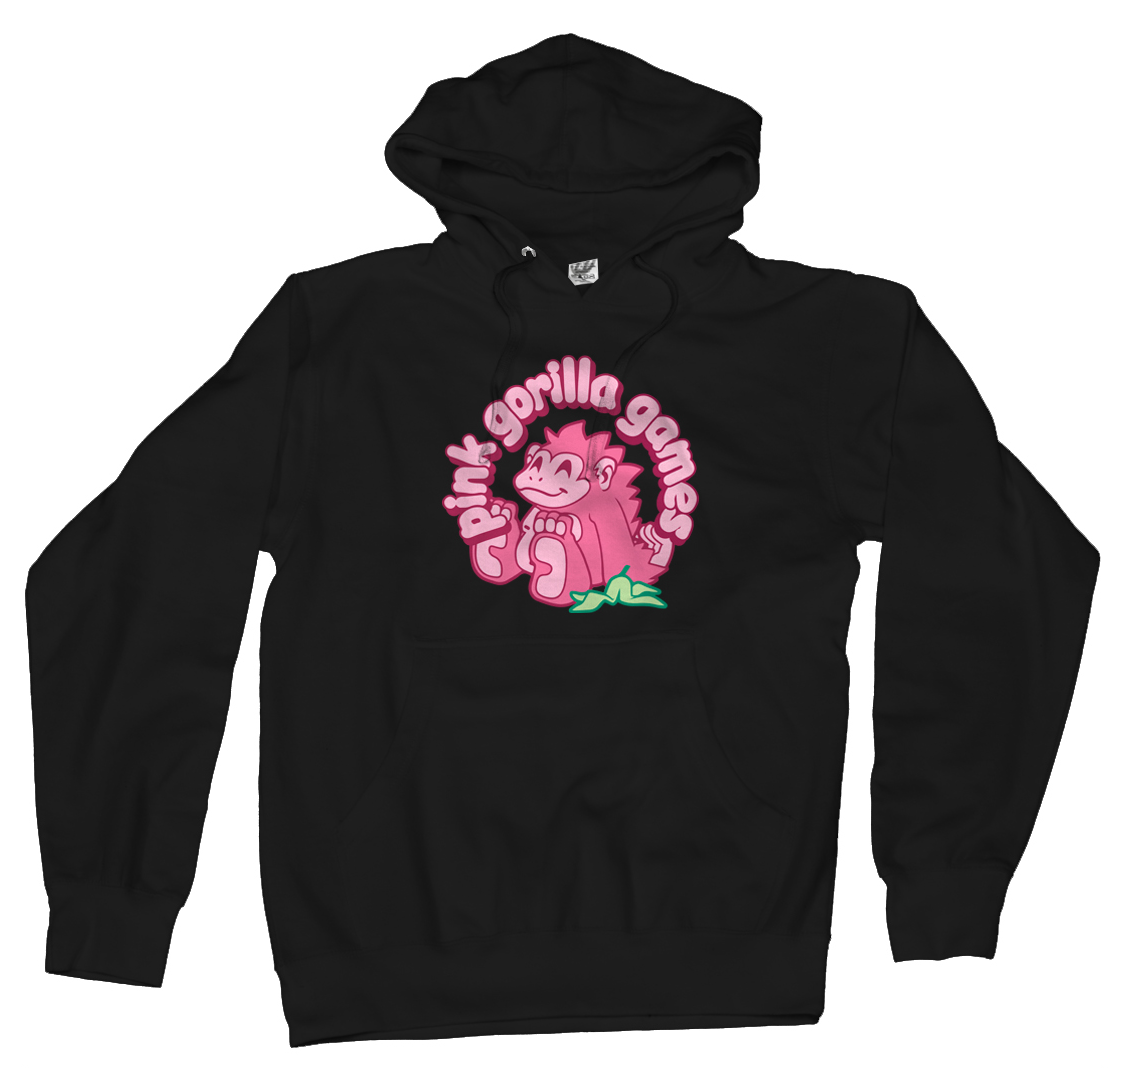 An image of a black hoodie with our Pink Gorilla Games logo